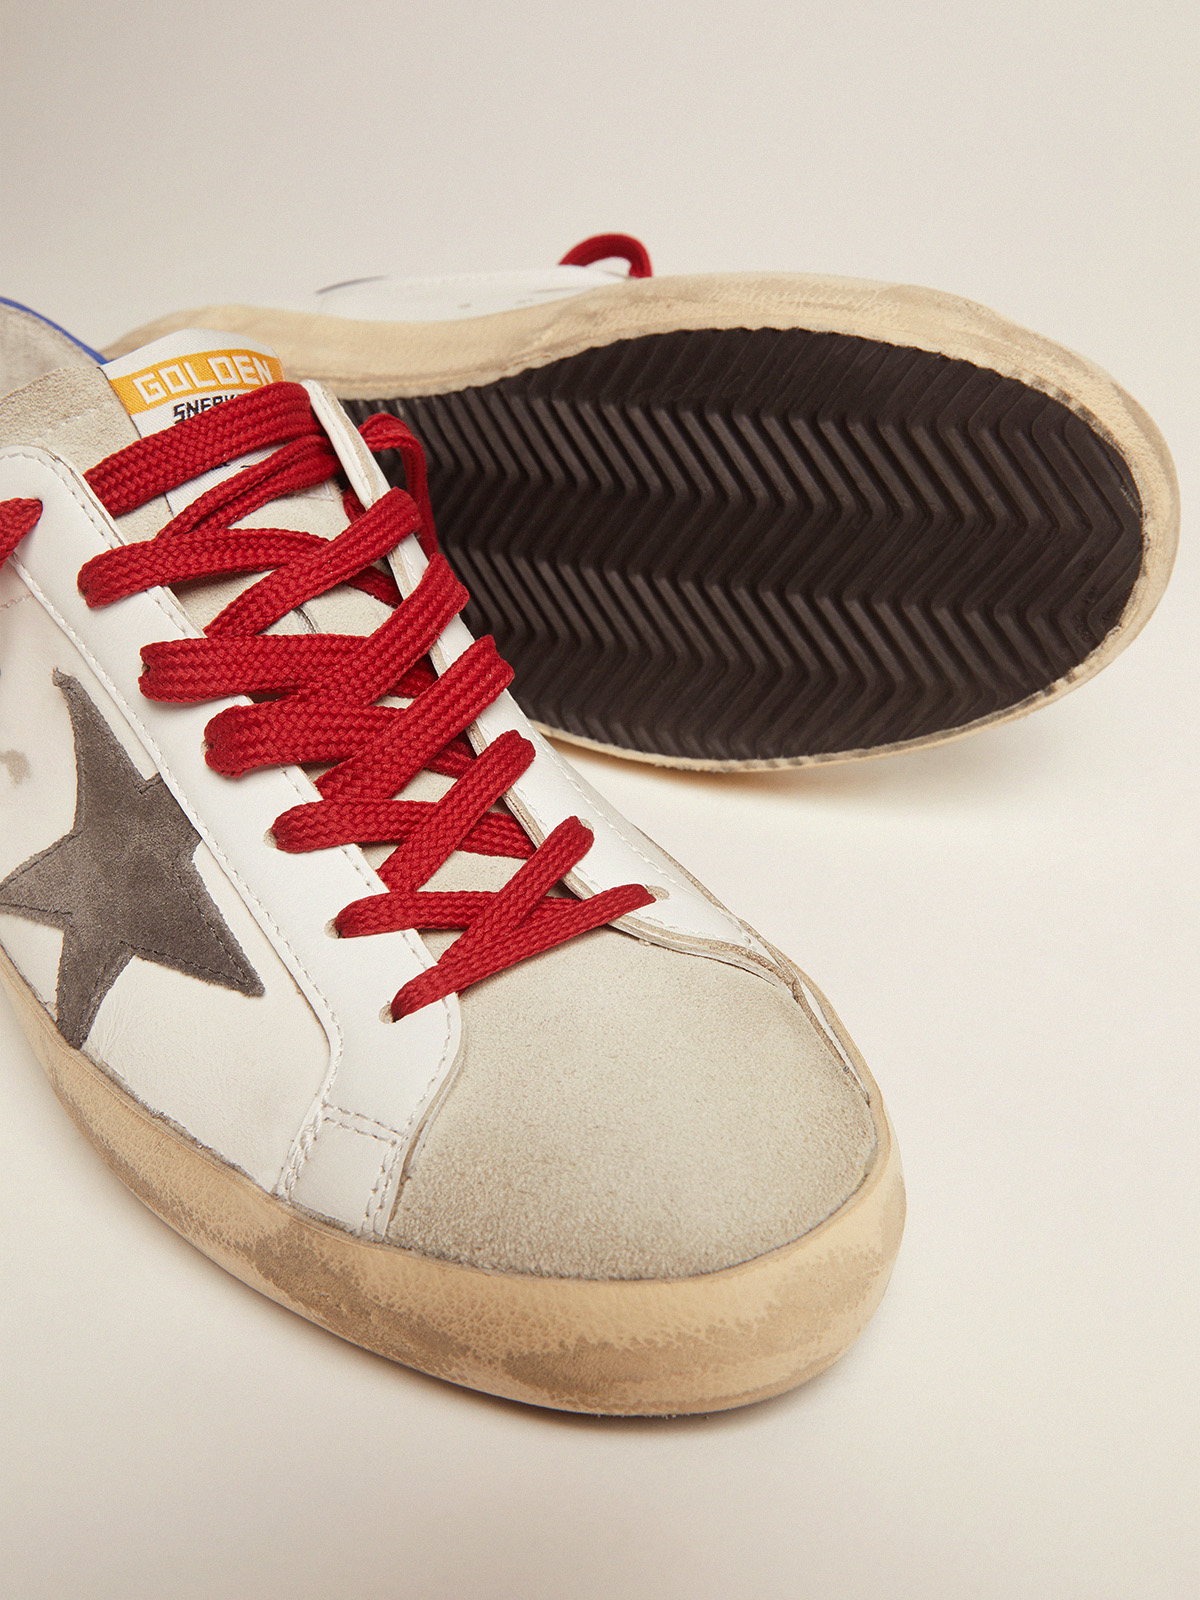 Super-Star sneakers with blue heel tab and red laces | Golden Goose